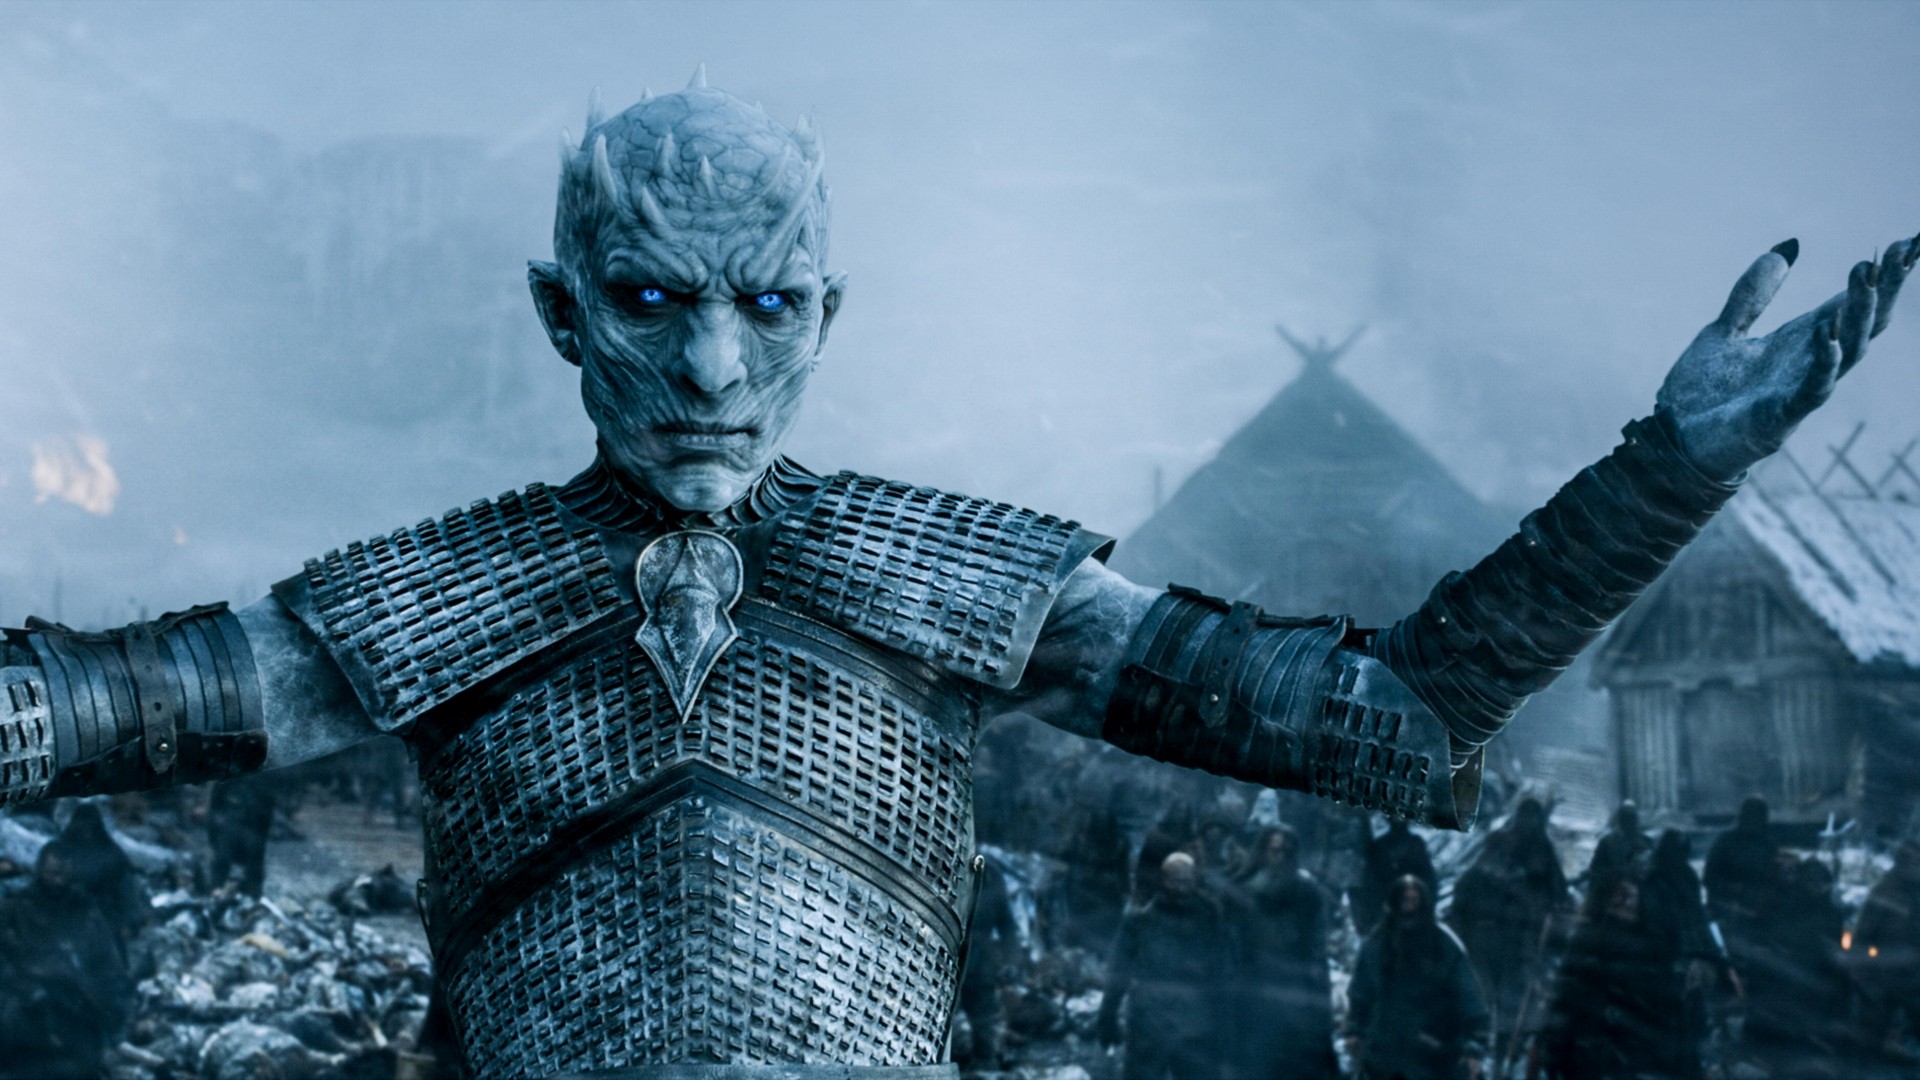 Game of Thrones Cast Vladimír Furdík Night King Wallpaper HD with high-resolution 1920x1080 pixel. You can use this poster wallpaper for your Desktop Computers, Mac Screensavers, Windows Backgrounds, iPhone Wallpapers, Tablet or Android Lock screen and another Mobile device